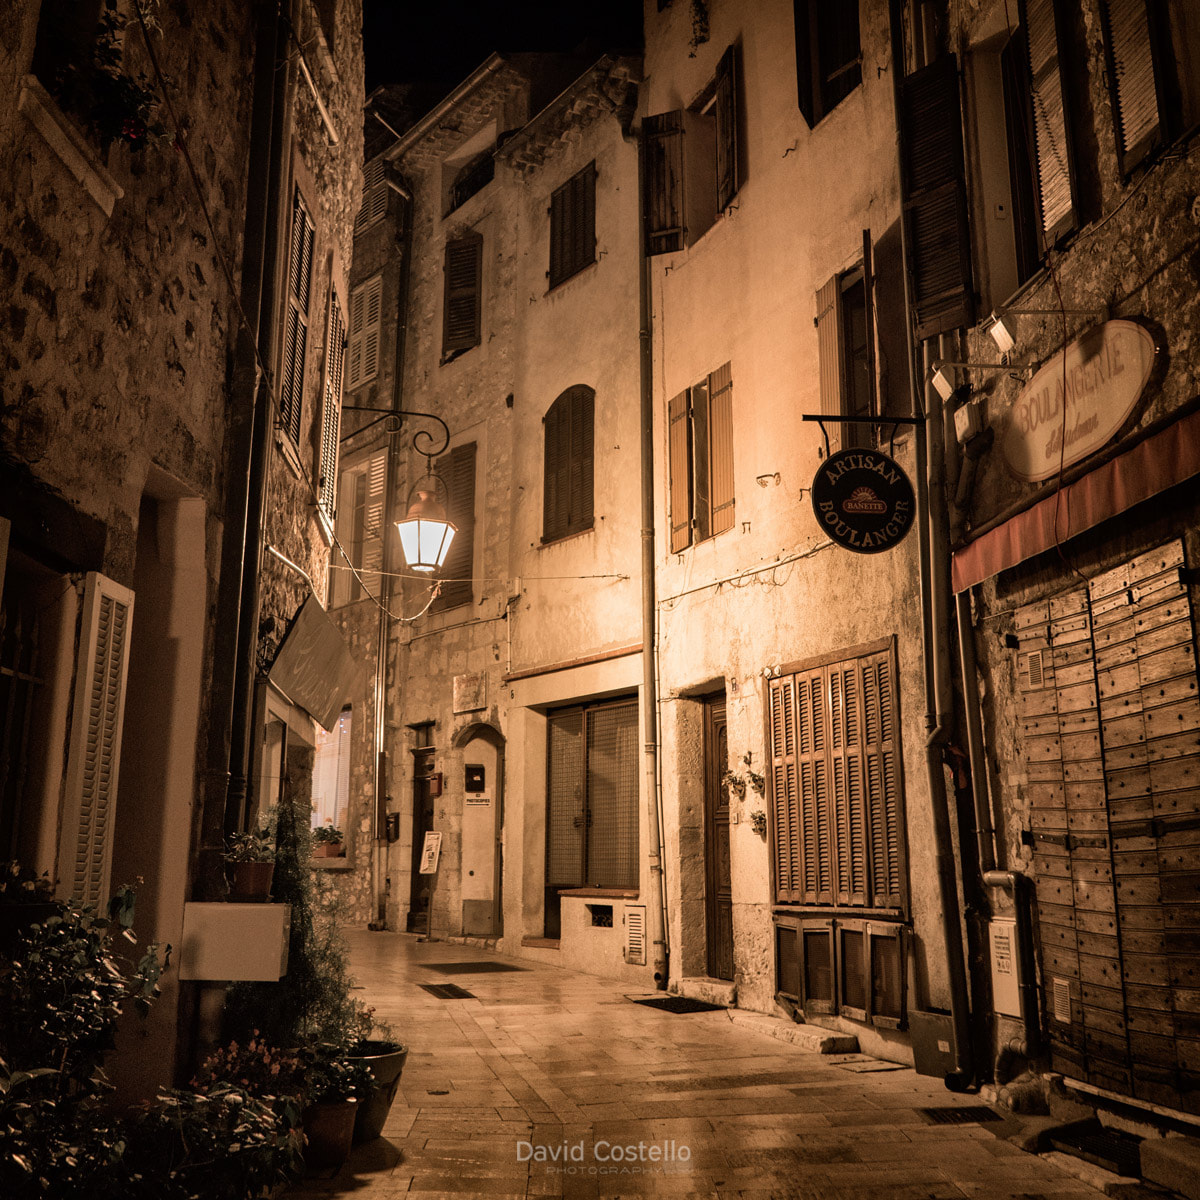 Walking through Vence at night, captivated by the lanterns, the light and the way this one fell over the louve shutters and the closed artisan boulanger.